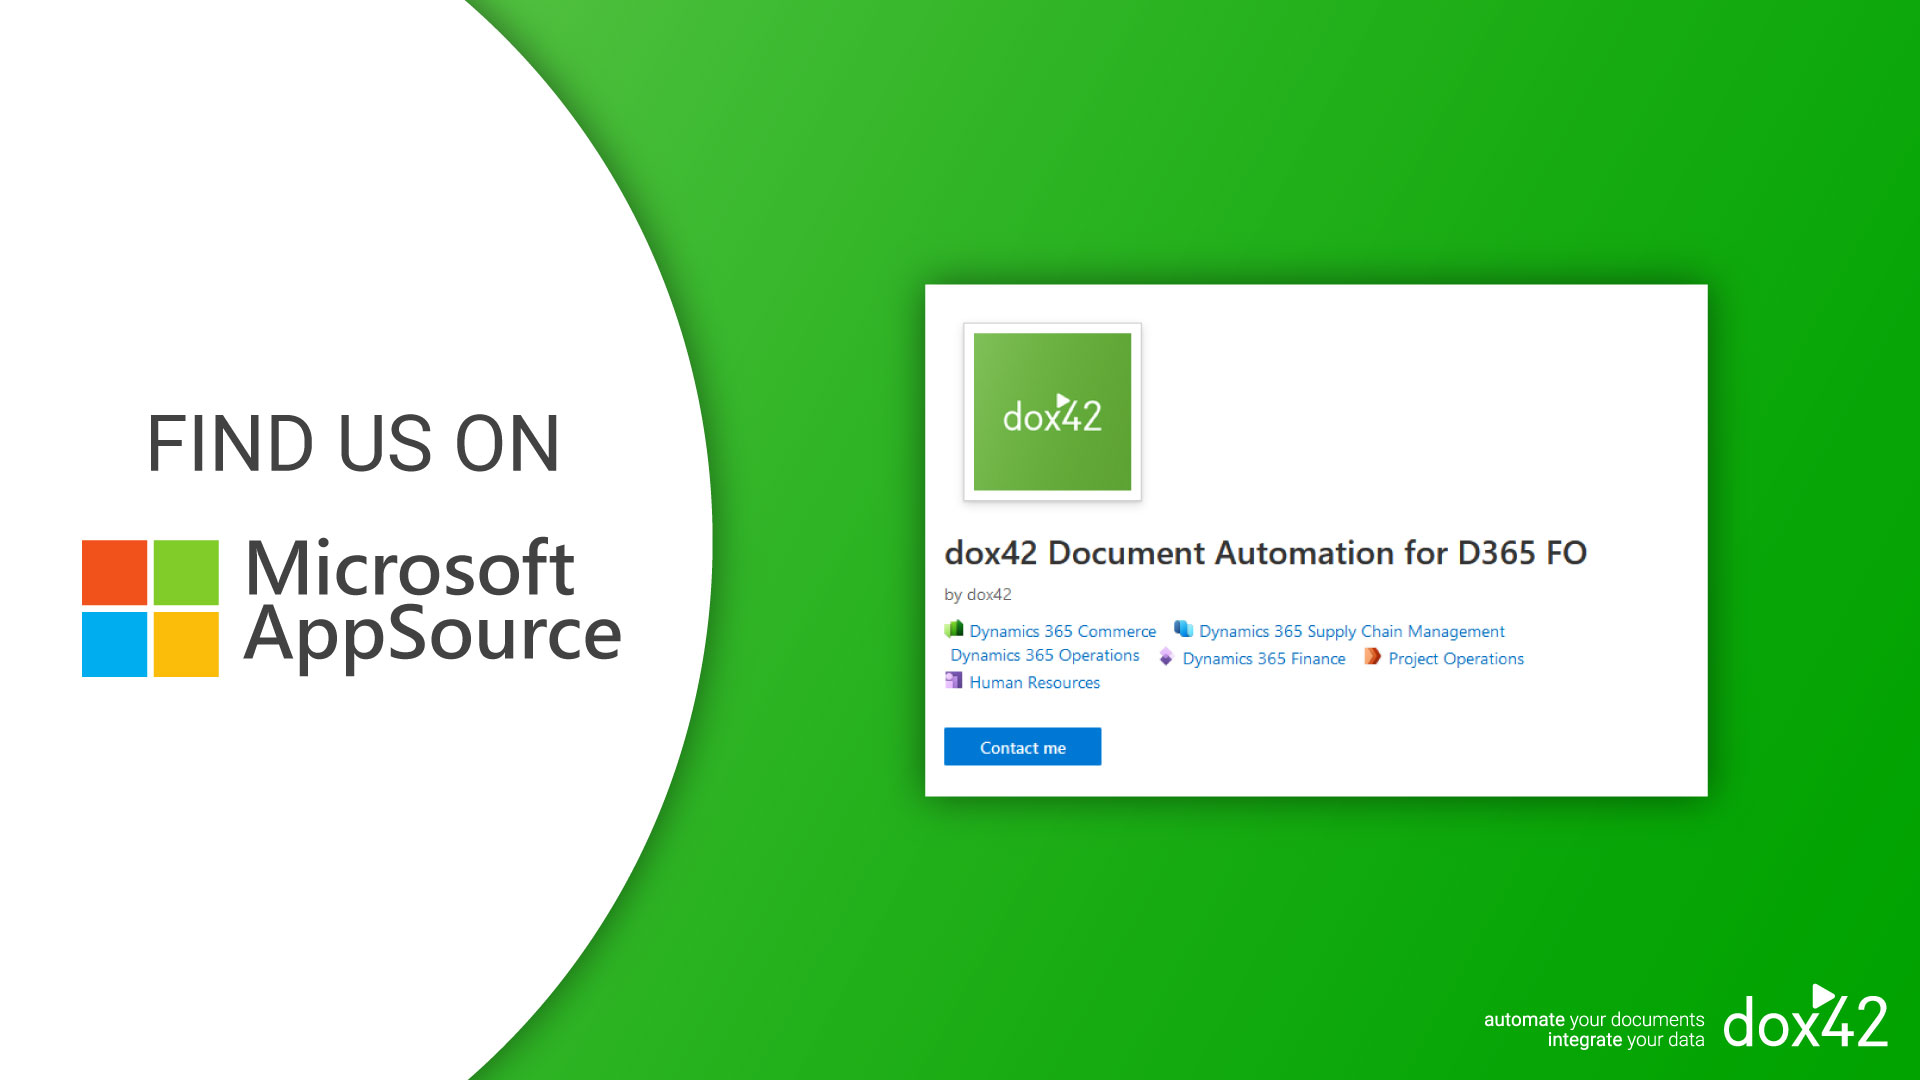 dox42 Document Automation for D365 FO